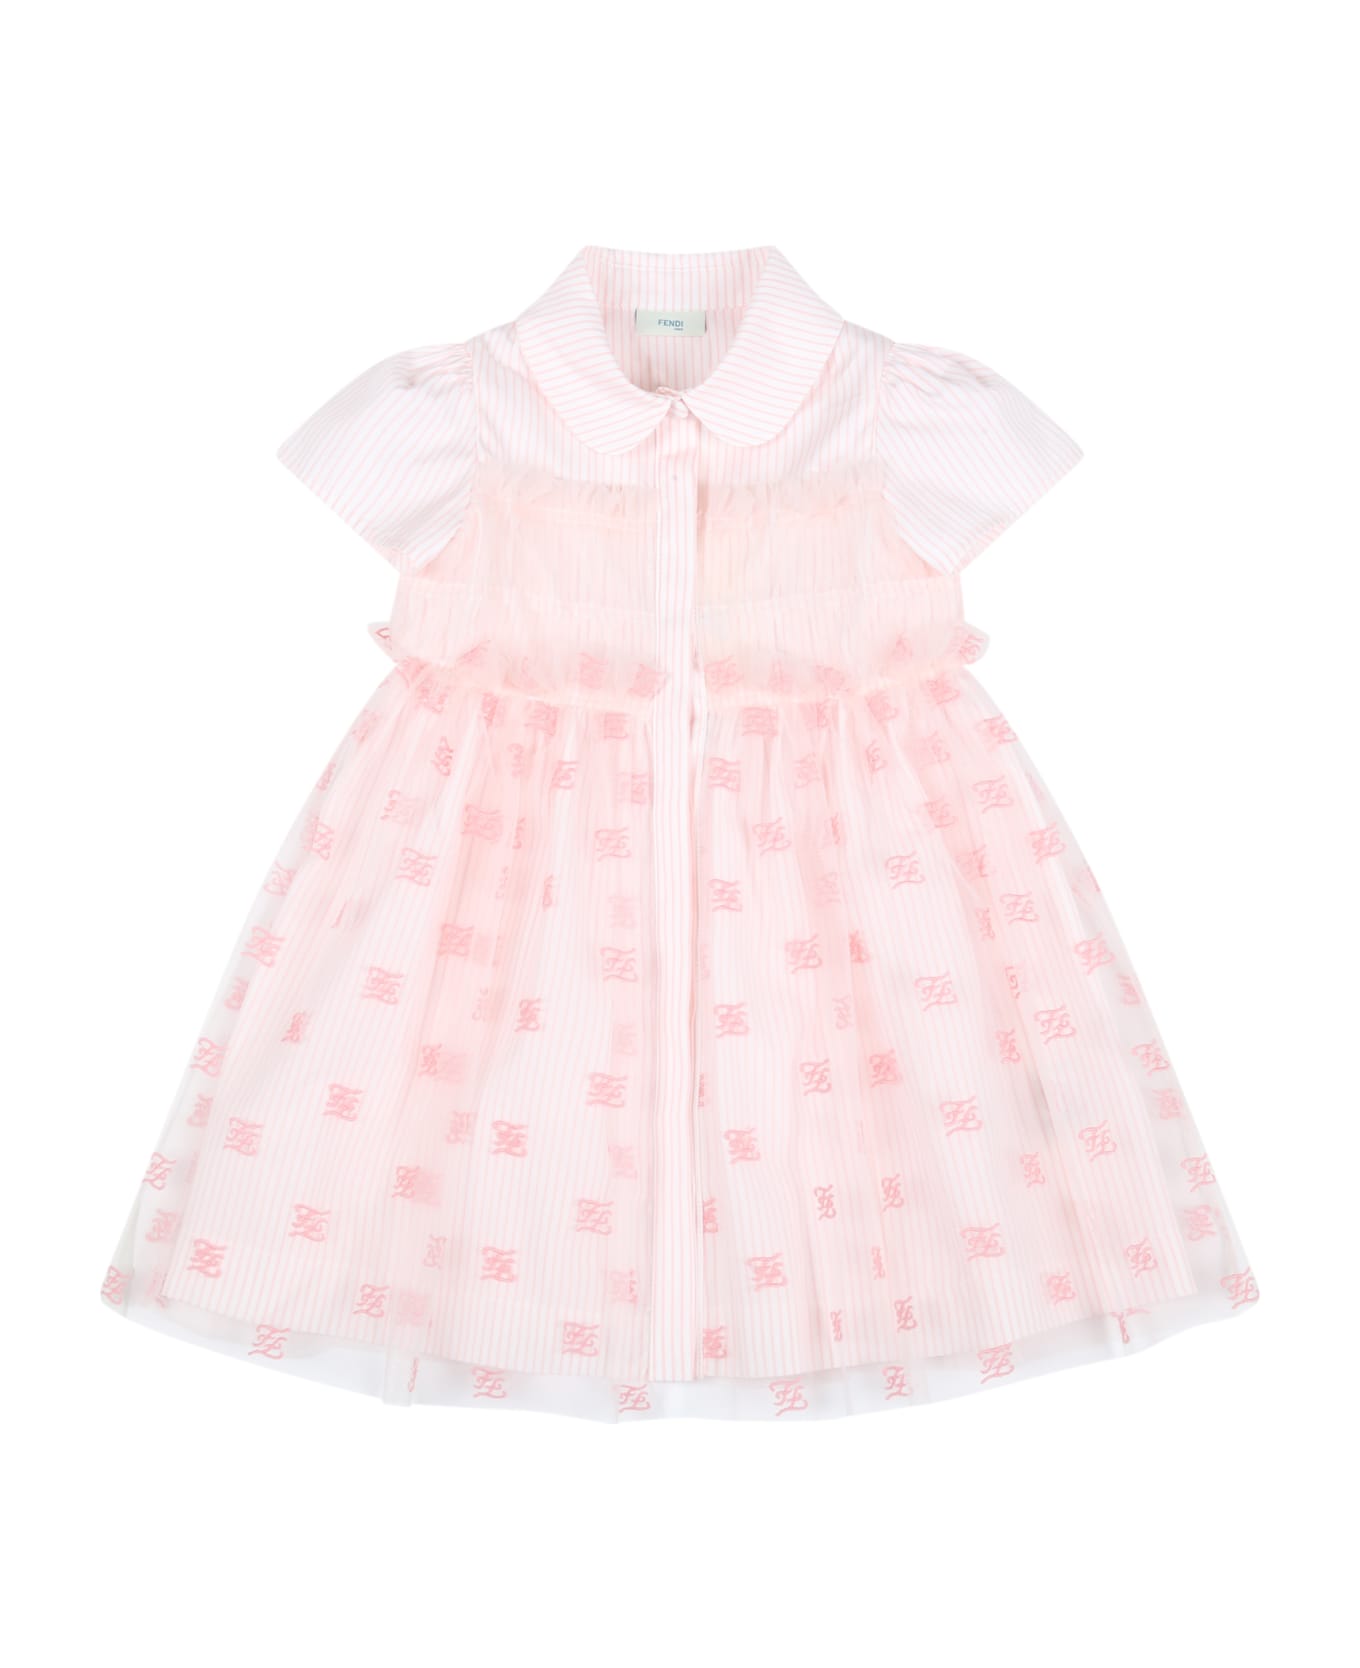 Fendi Pink Dress For Baby Girl With Embroidered Ff - Pink